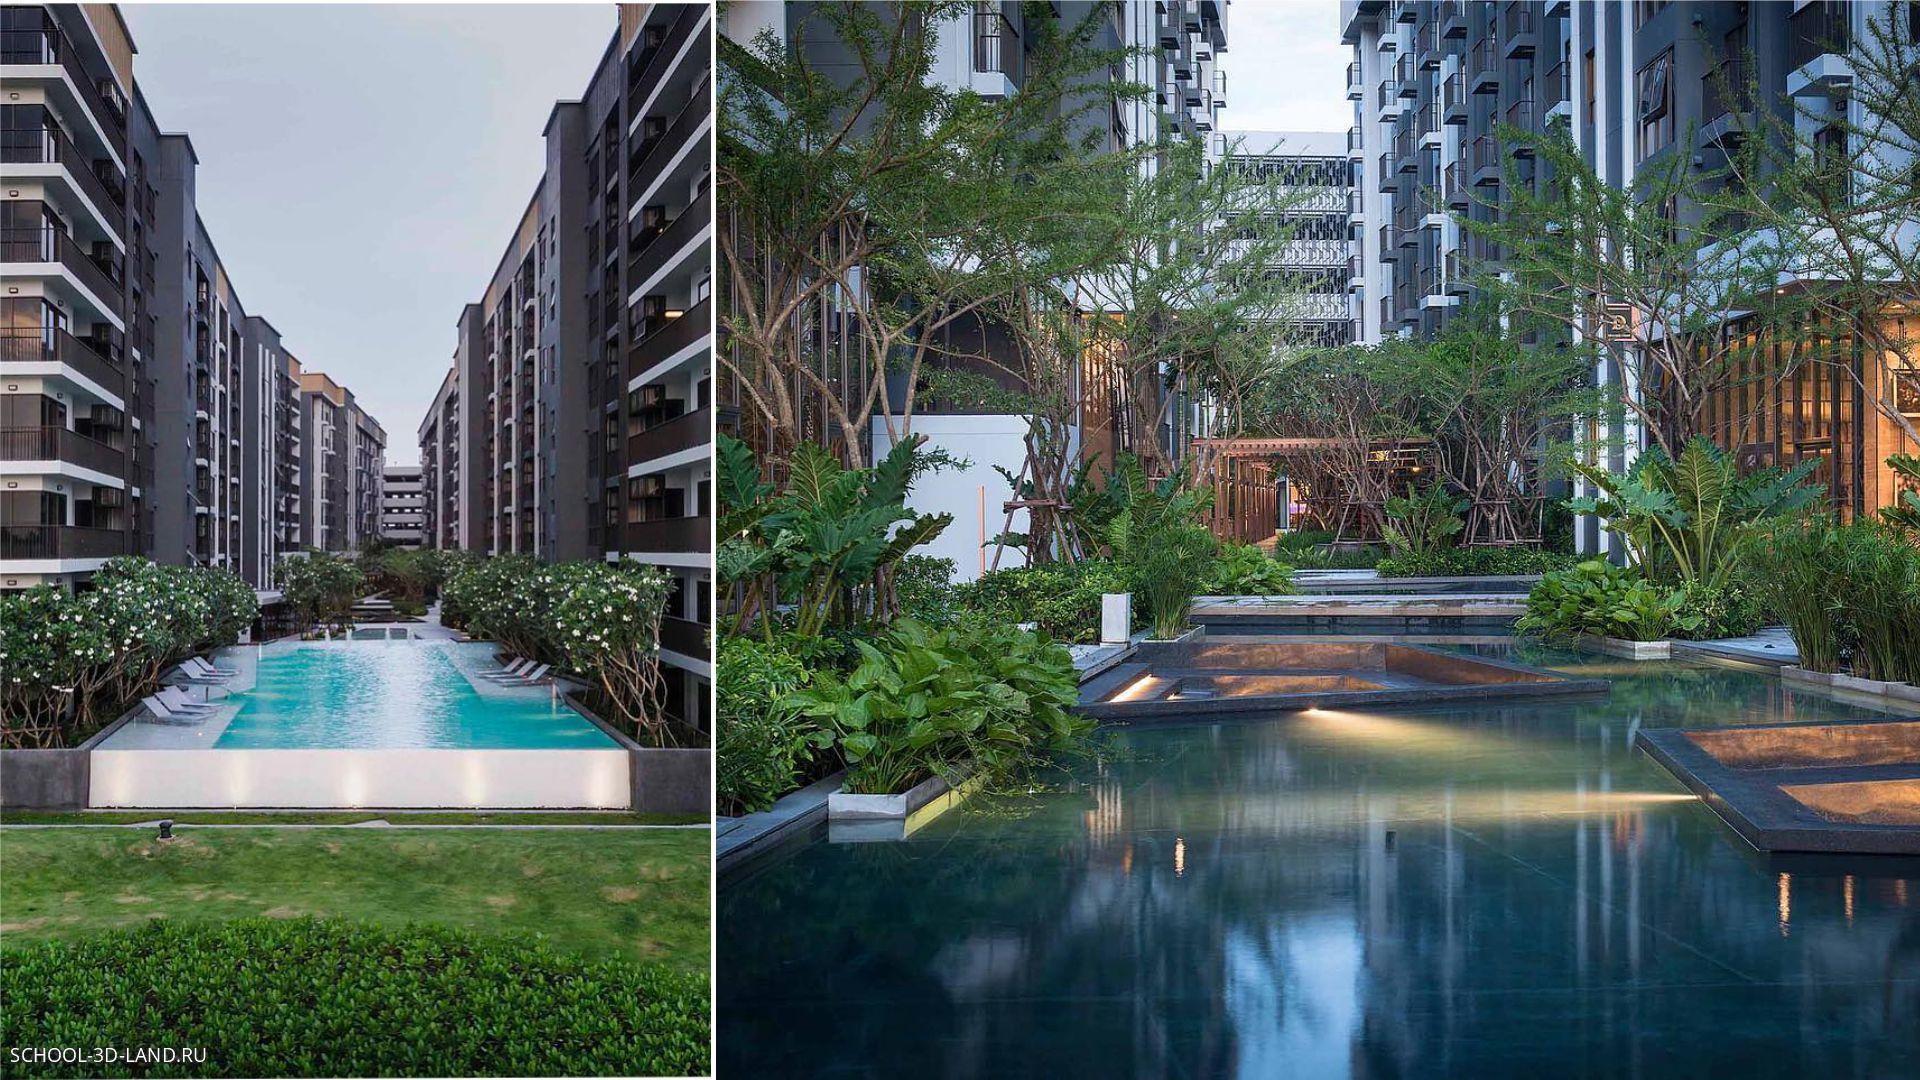 New residential area in Thailand